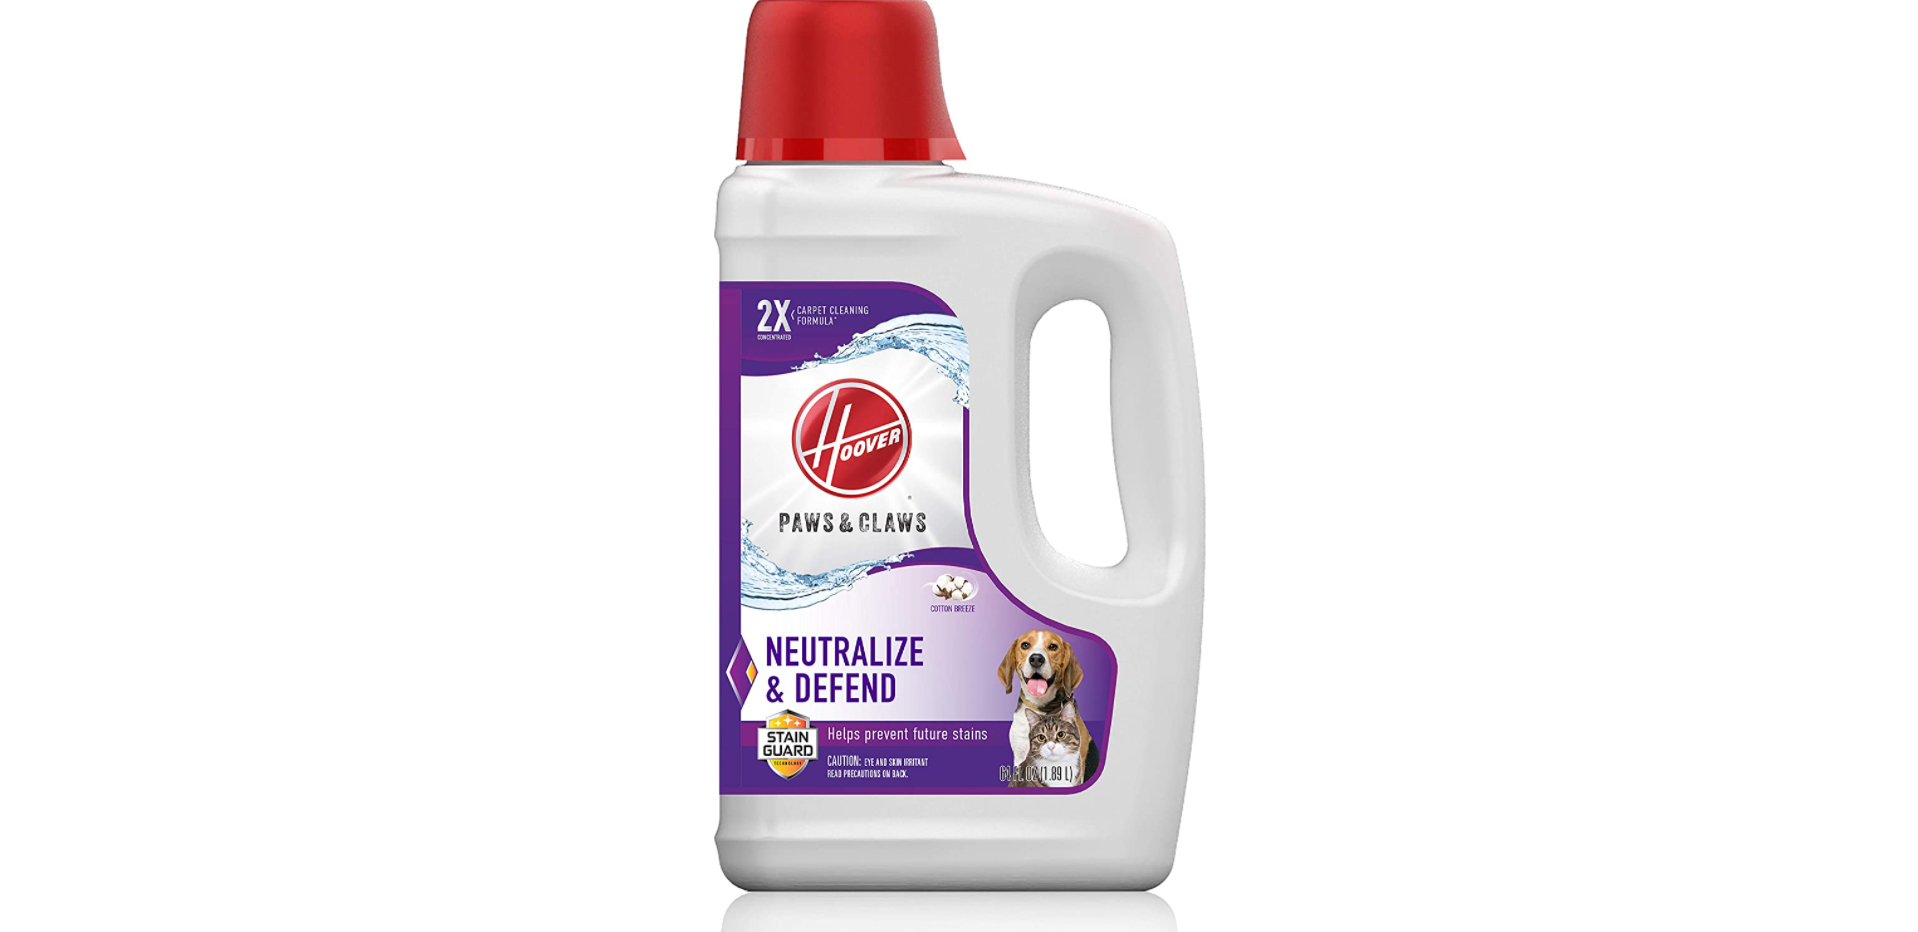 Hoover, White Paws & Claws Deep Cleaning Carpet Shampoo with Stainguard, Concentrated Machine Cleaner Solution for Pets